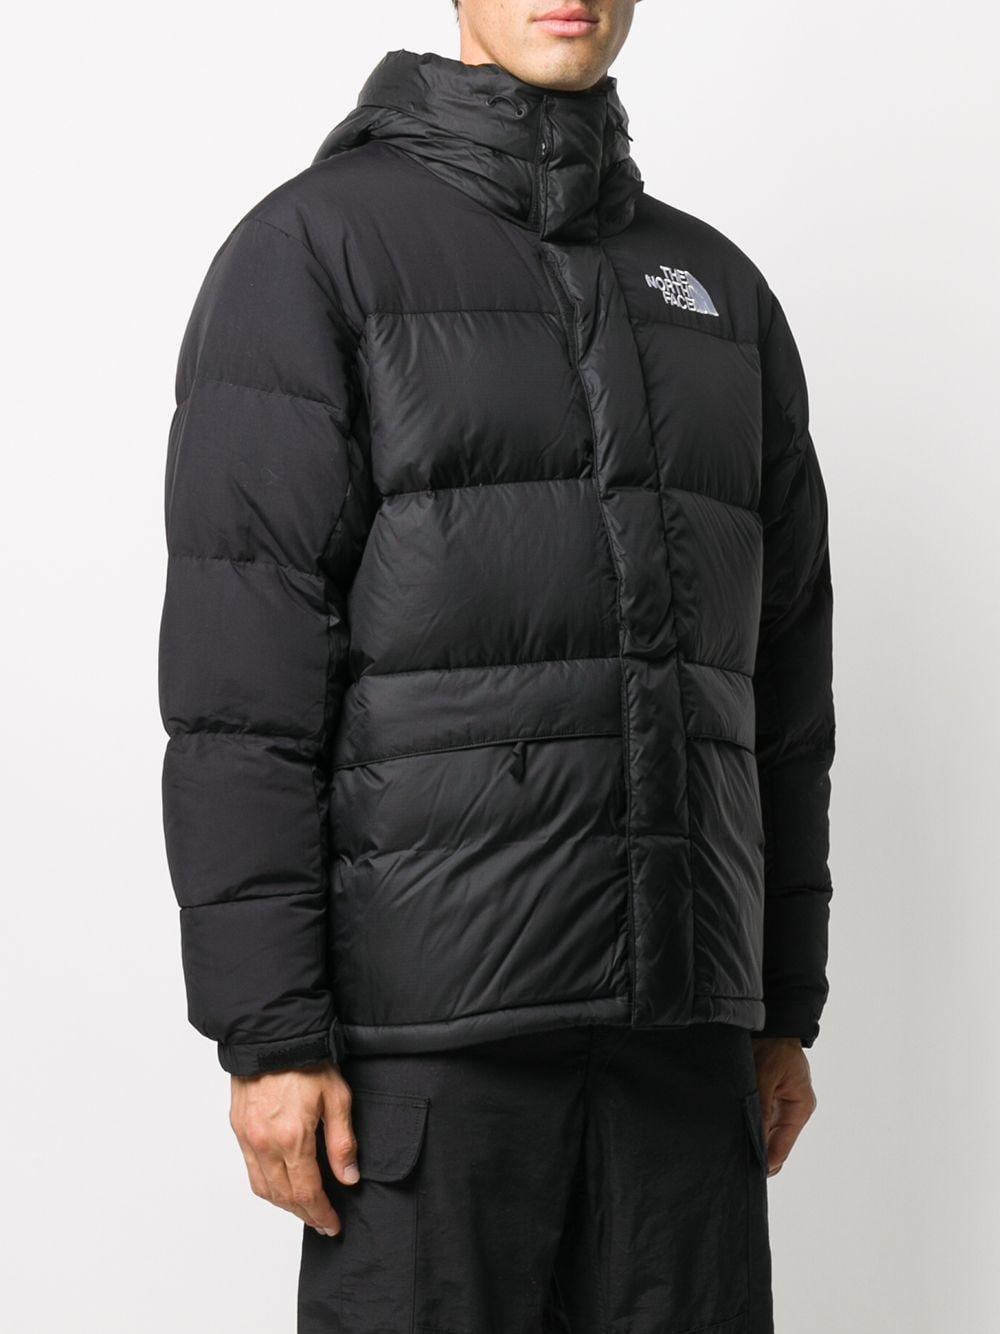 The North Face Synthetic Himalayan Padded Jacket in Black for Men - Lyst